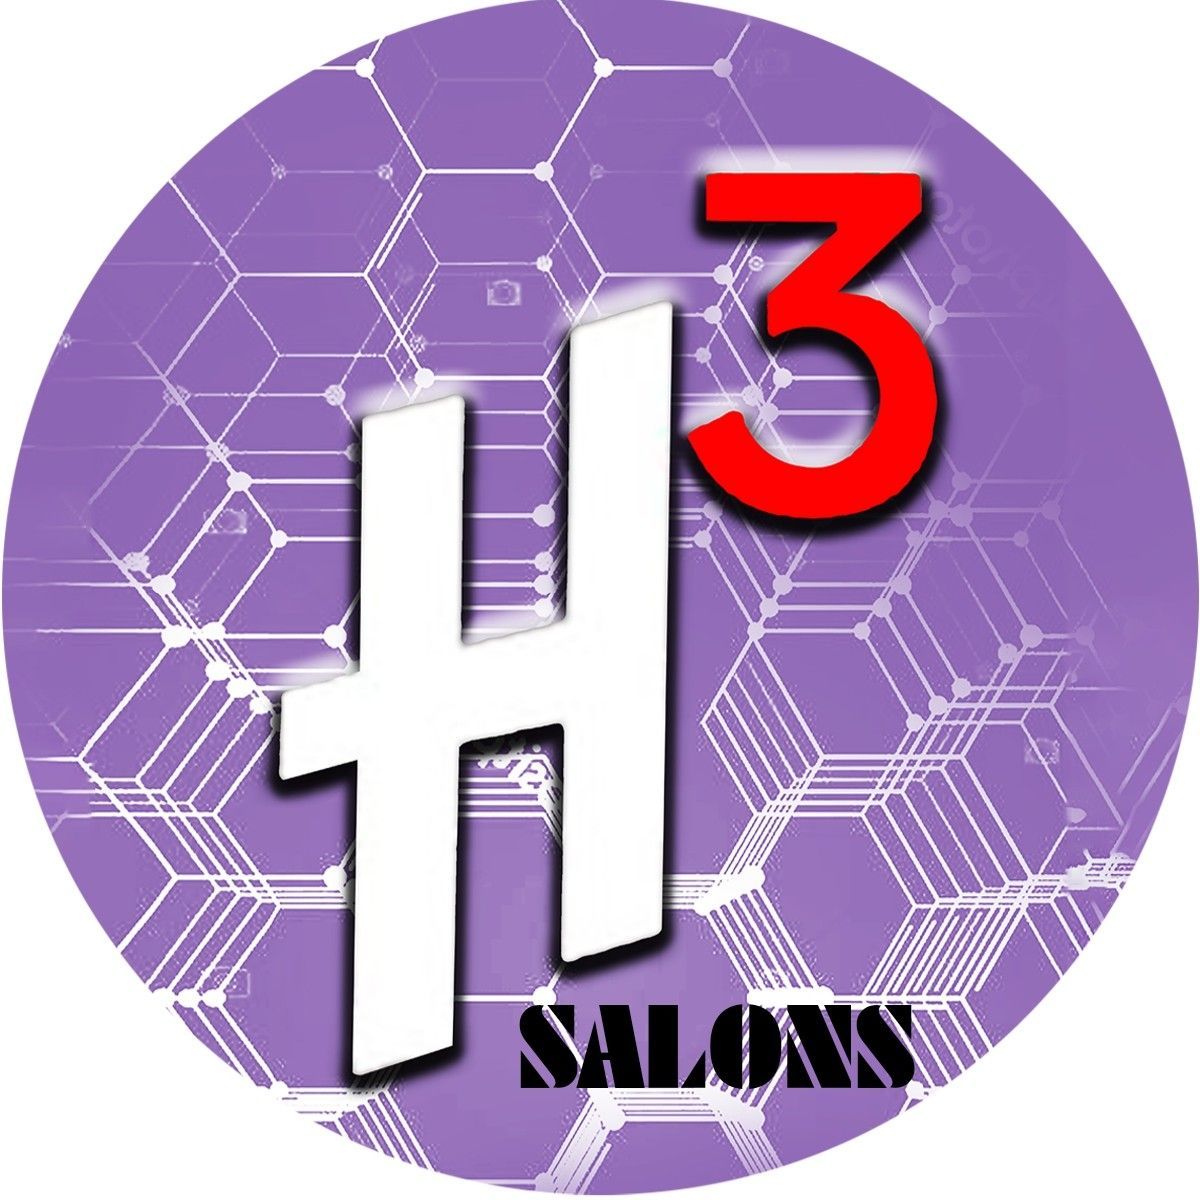 H3 Salons, 8055 West Ave, # 121, 78213-1841, 78213